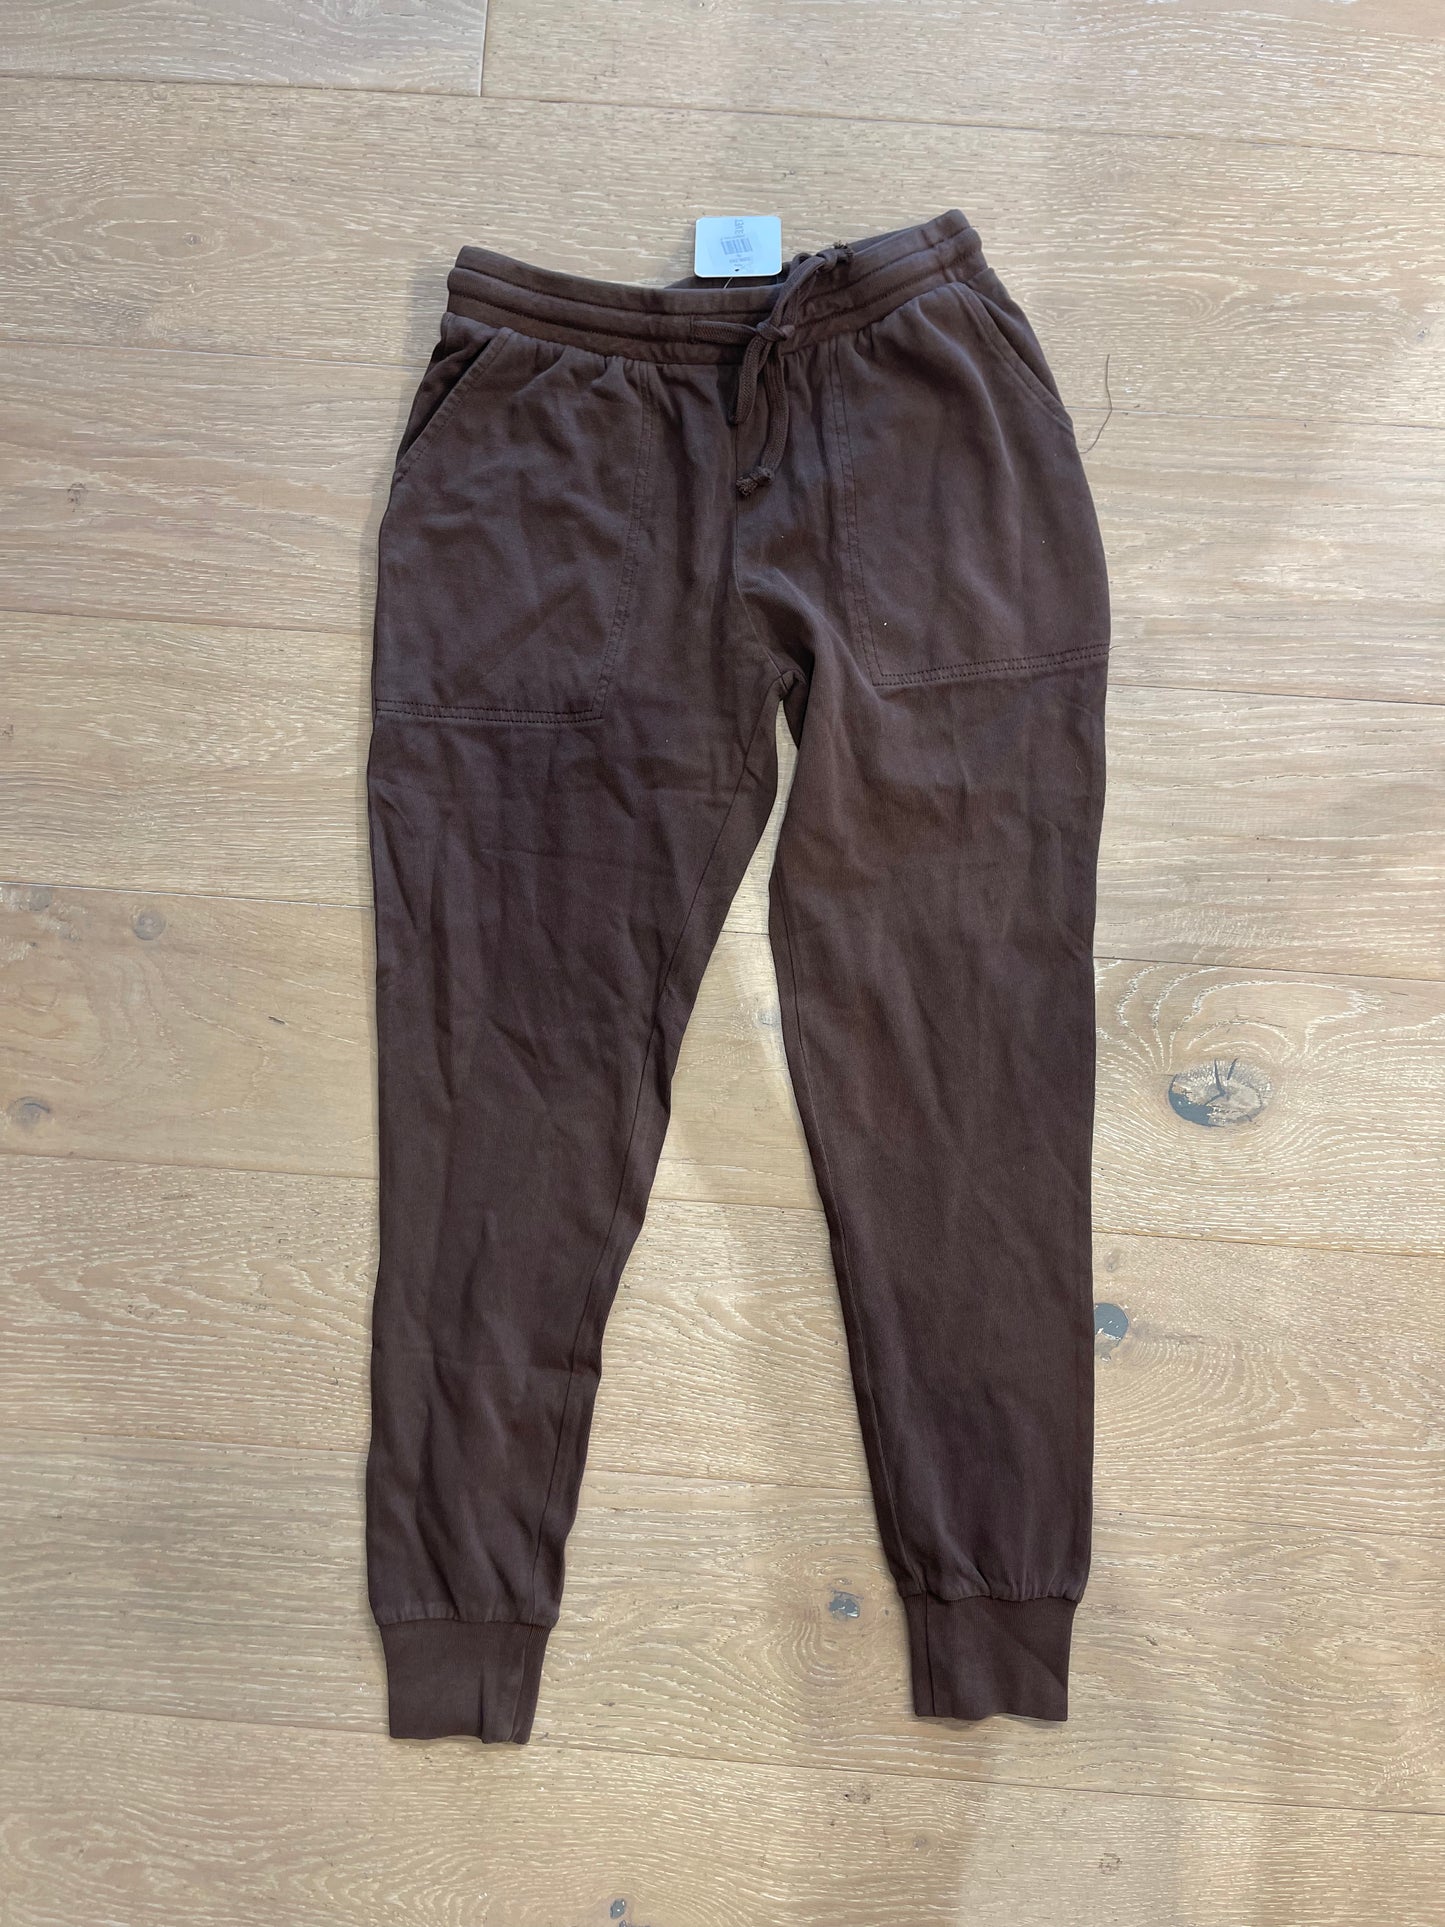 Joggers in chocolate